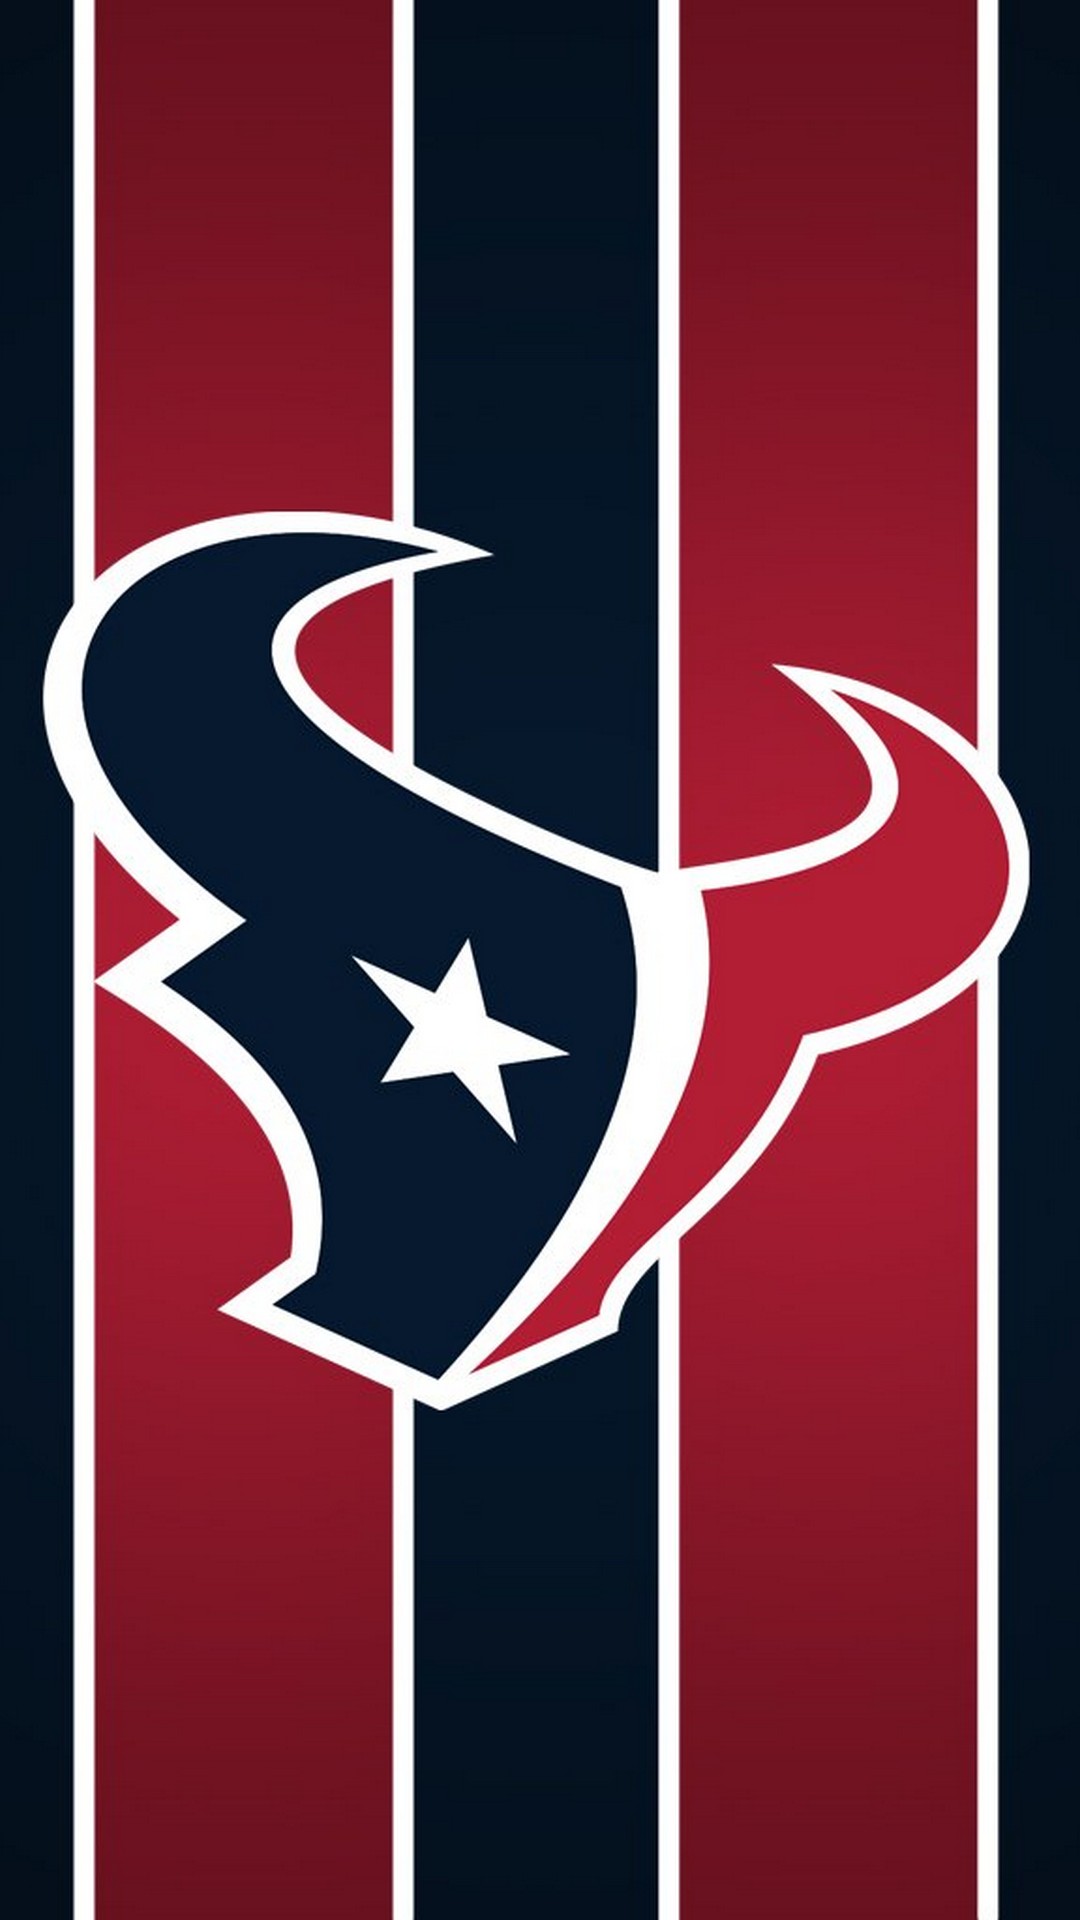 Houston Texans iPhone Wallpaper in HD With high-resolution 1080X1920 pixel. Download and set as wallpaper for Apple iPhone X, XS Max, XR, 8, 7, 6, SE, iPad, Android